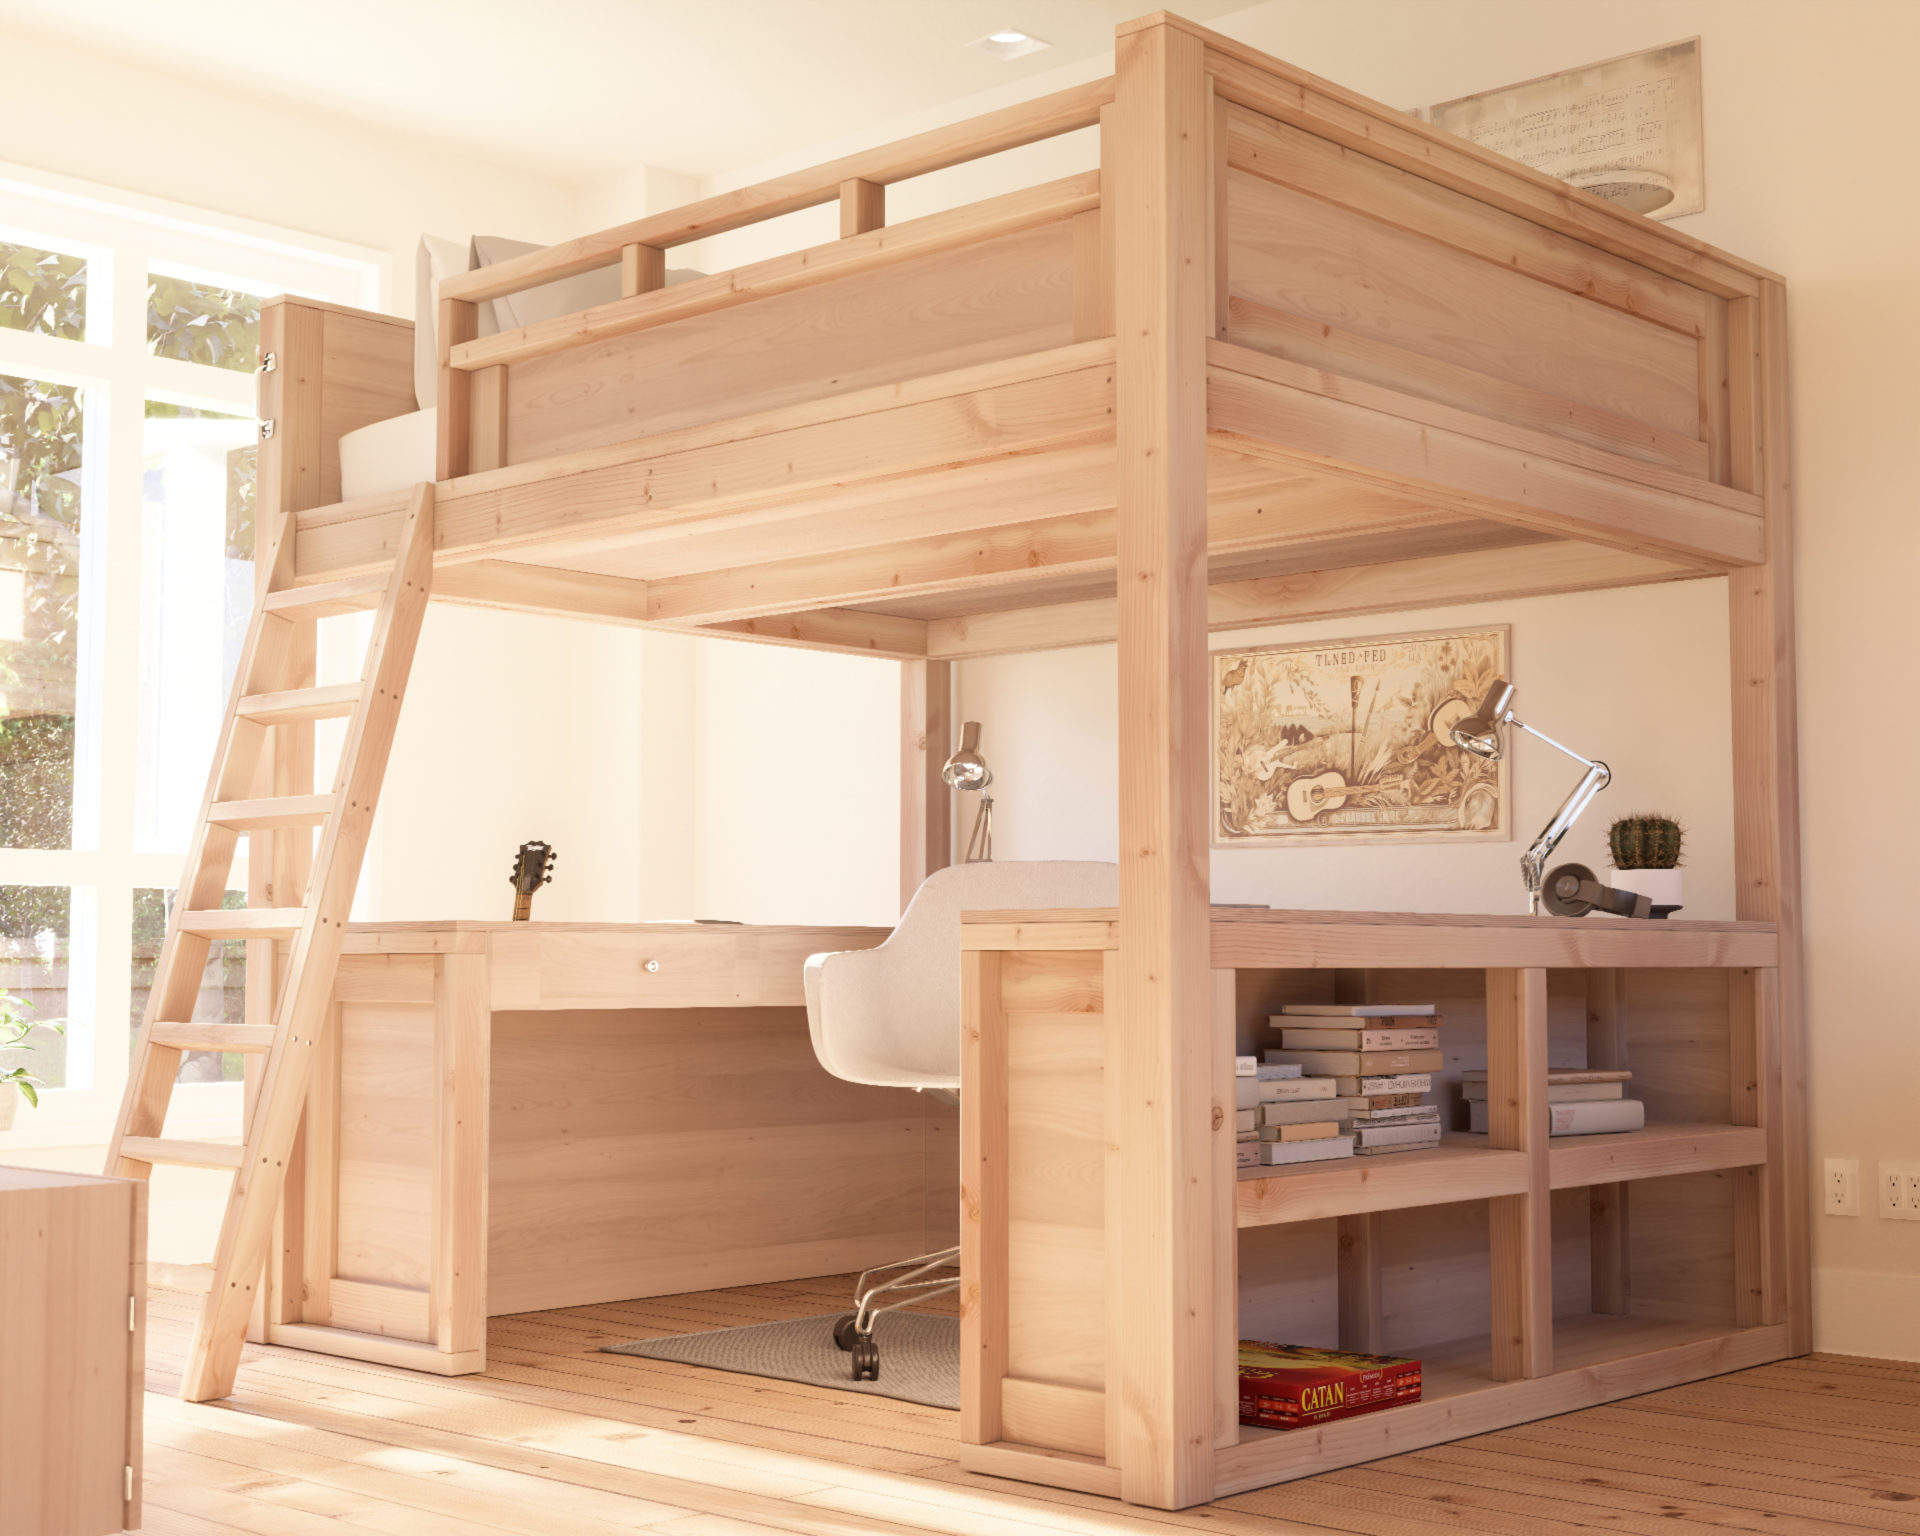 A Queen Loft Bed for Optimal Sleep and Study - Step-by-Step PDF - DIY ...